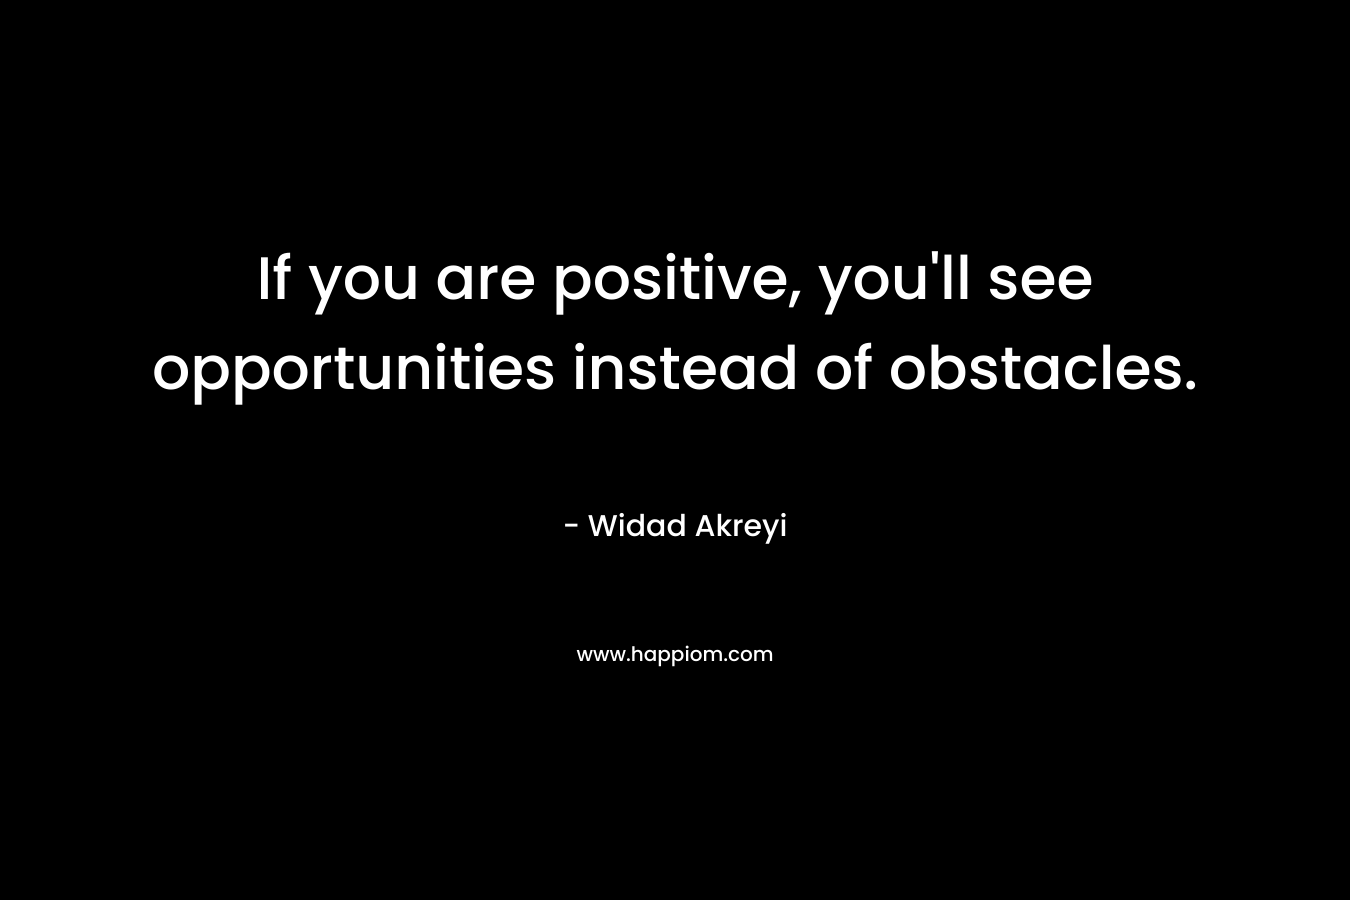 If you are positive, you'll see opportunities instead of obstacles.